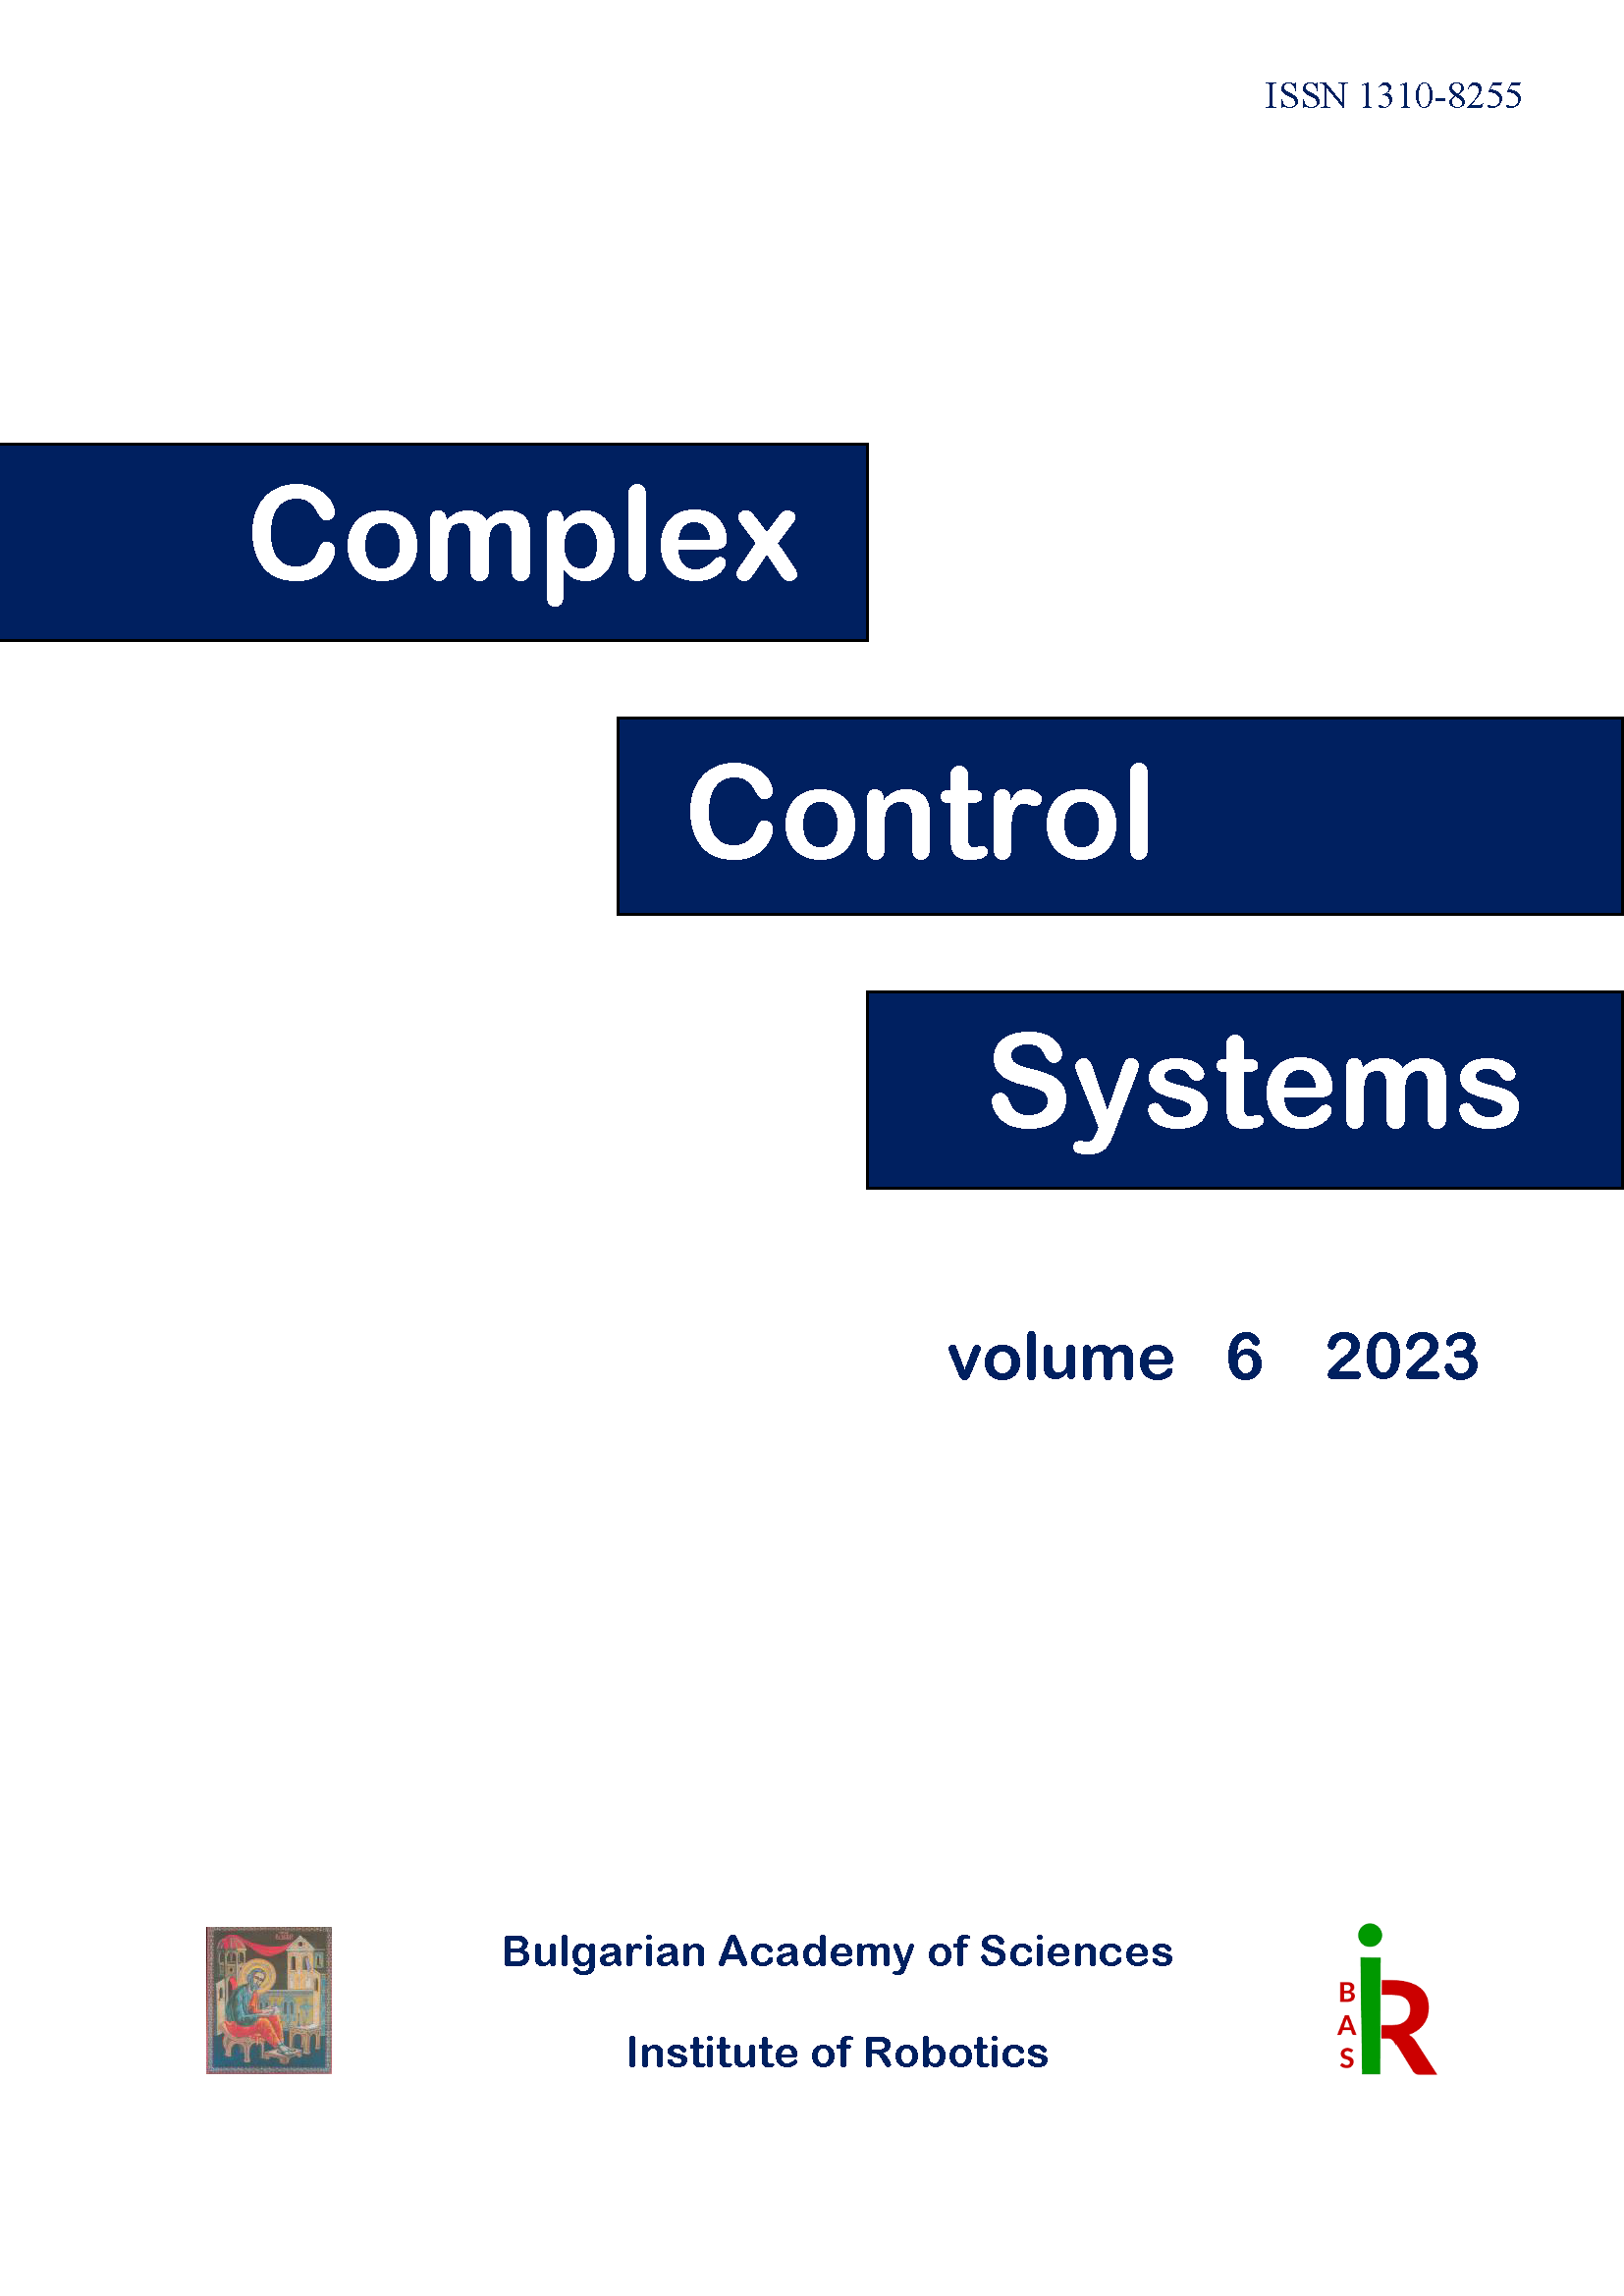 Complex Control Systems